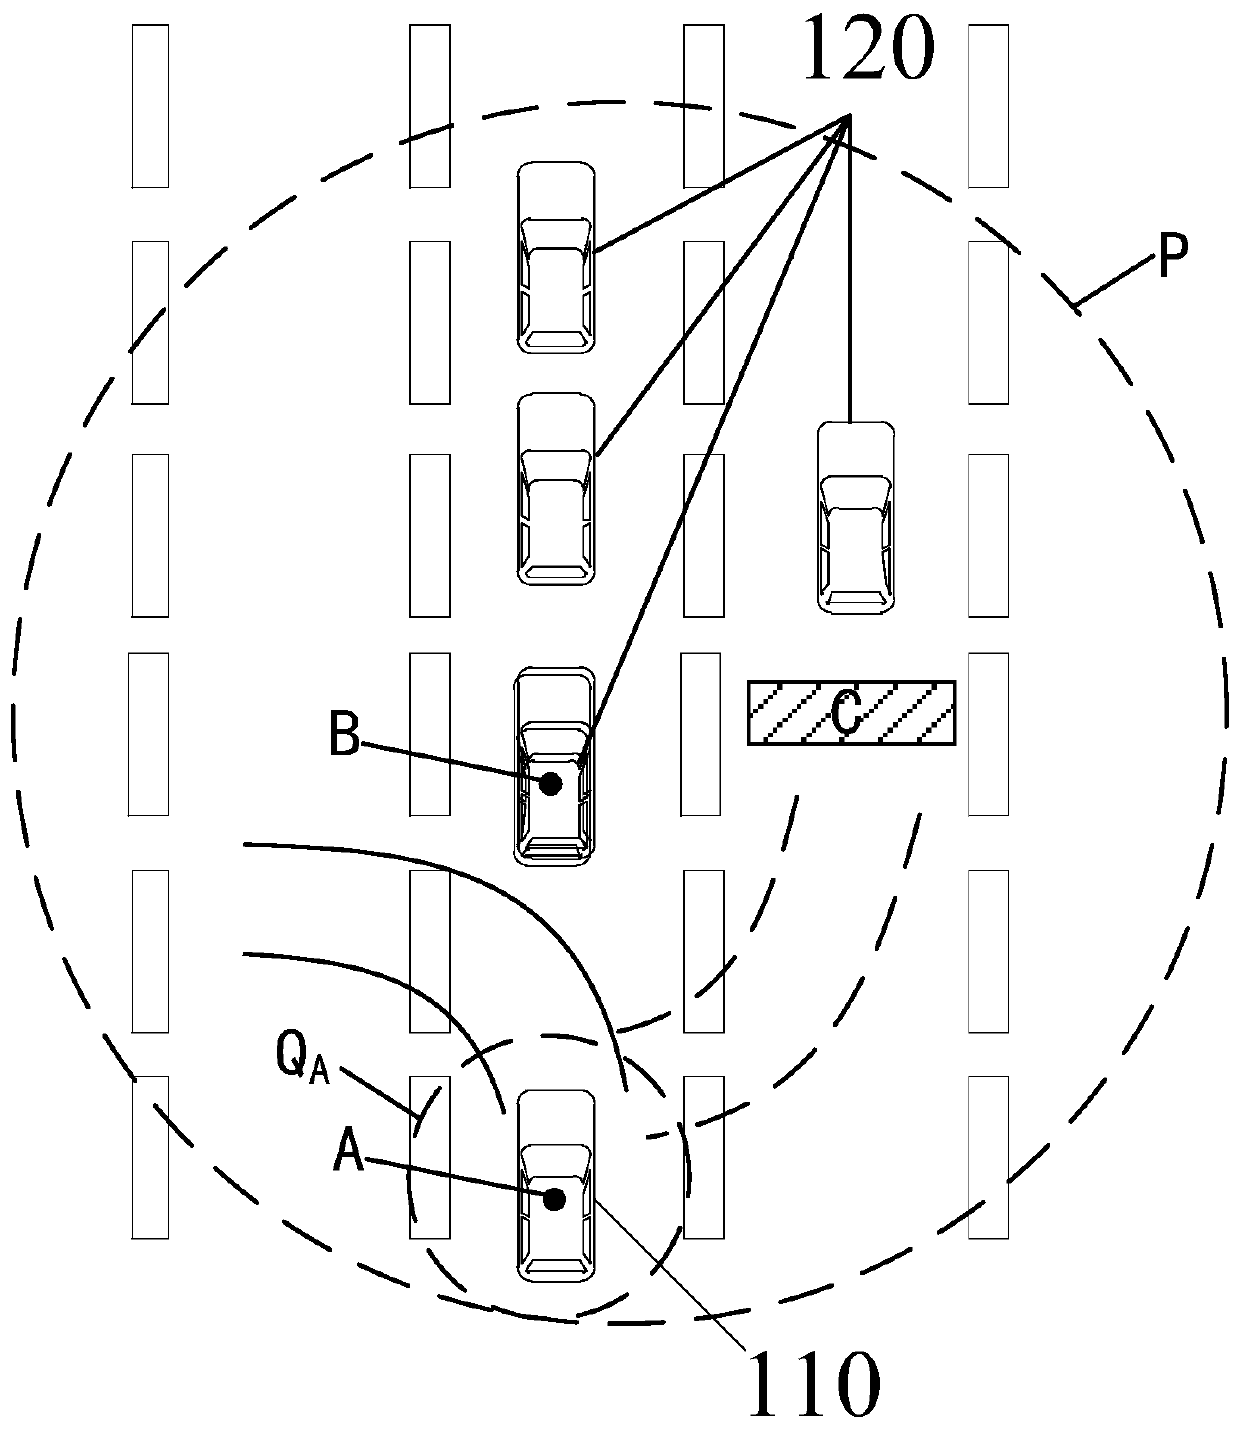 Environmental perception system used for autonomous vehicle and based on sensor network